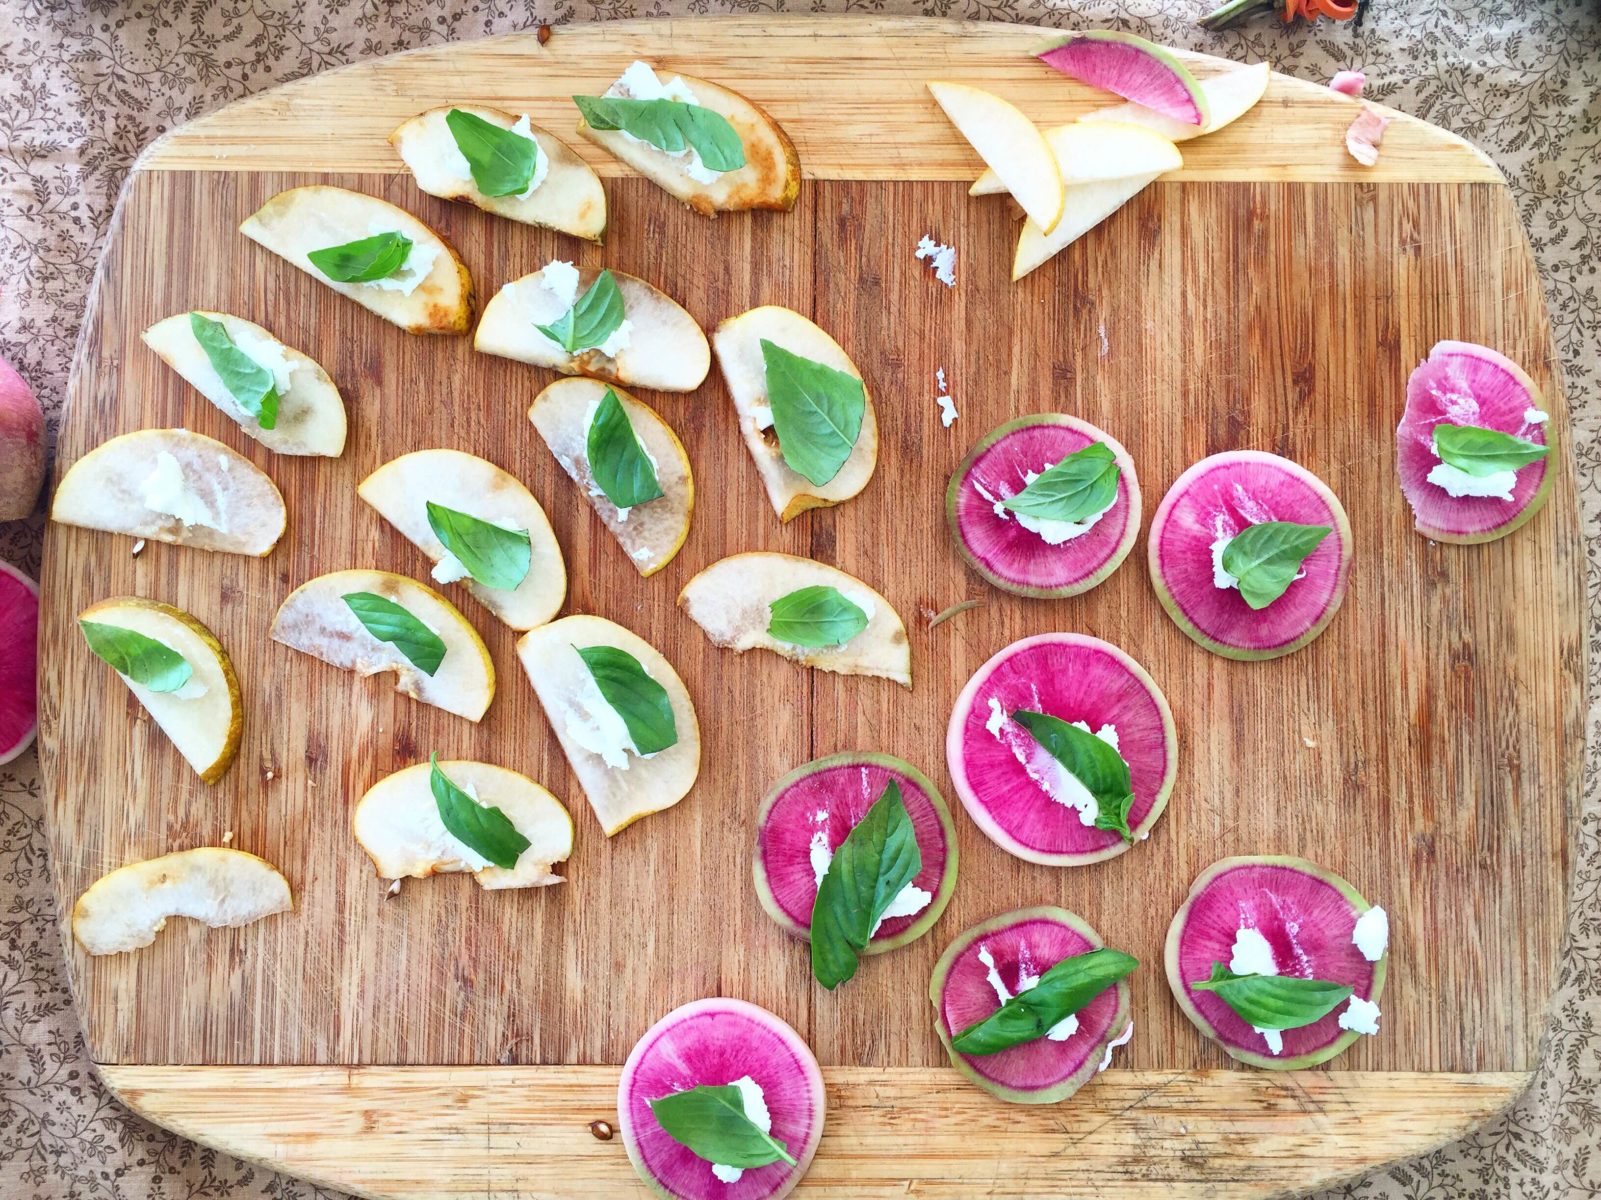 Radish and Pear with Chevre and Basil